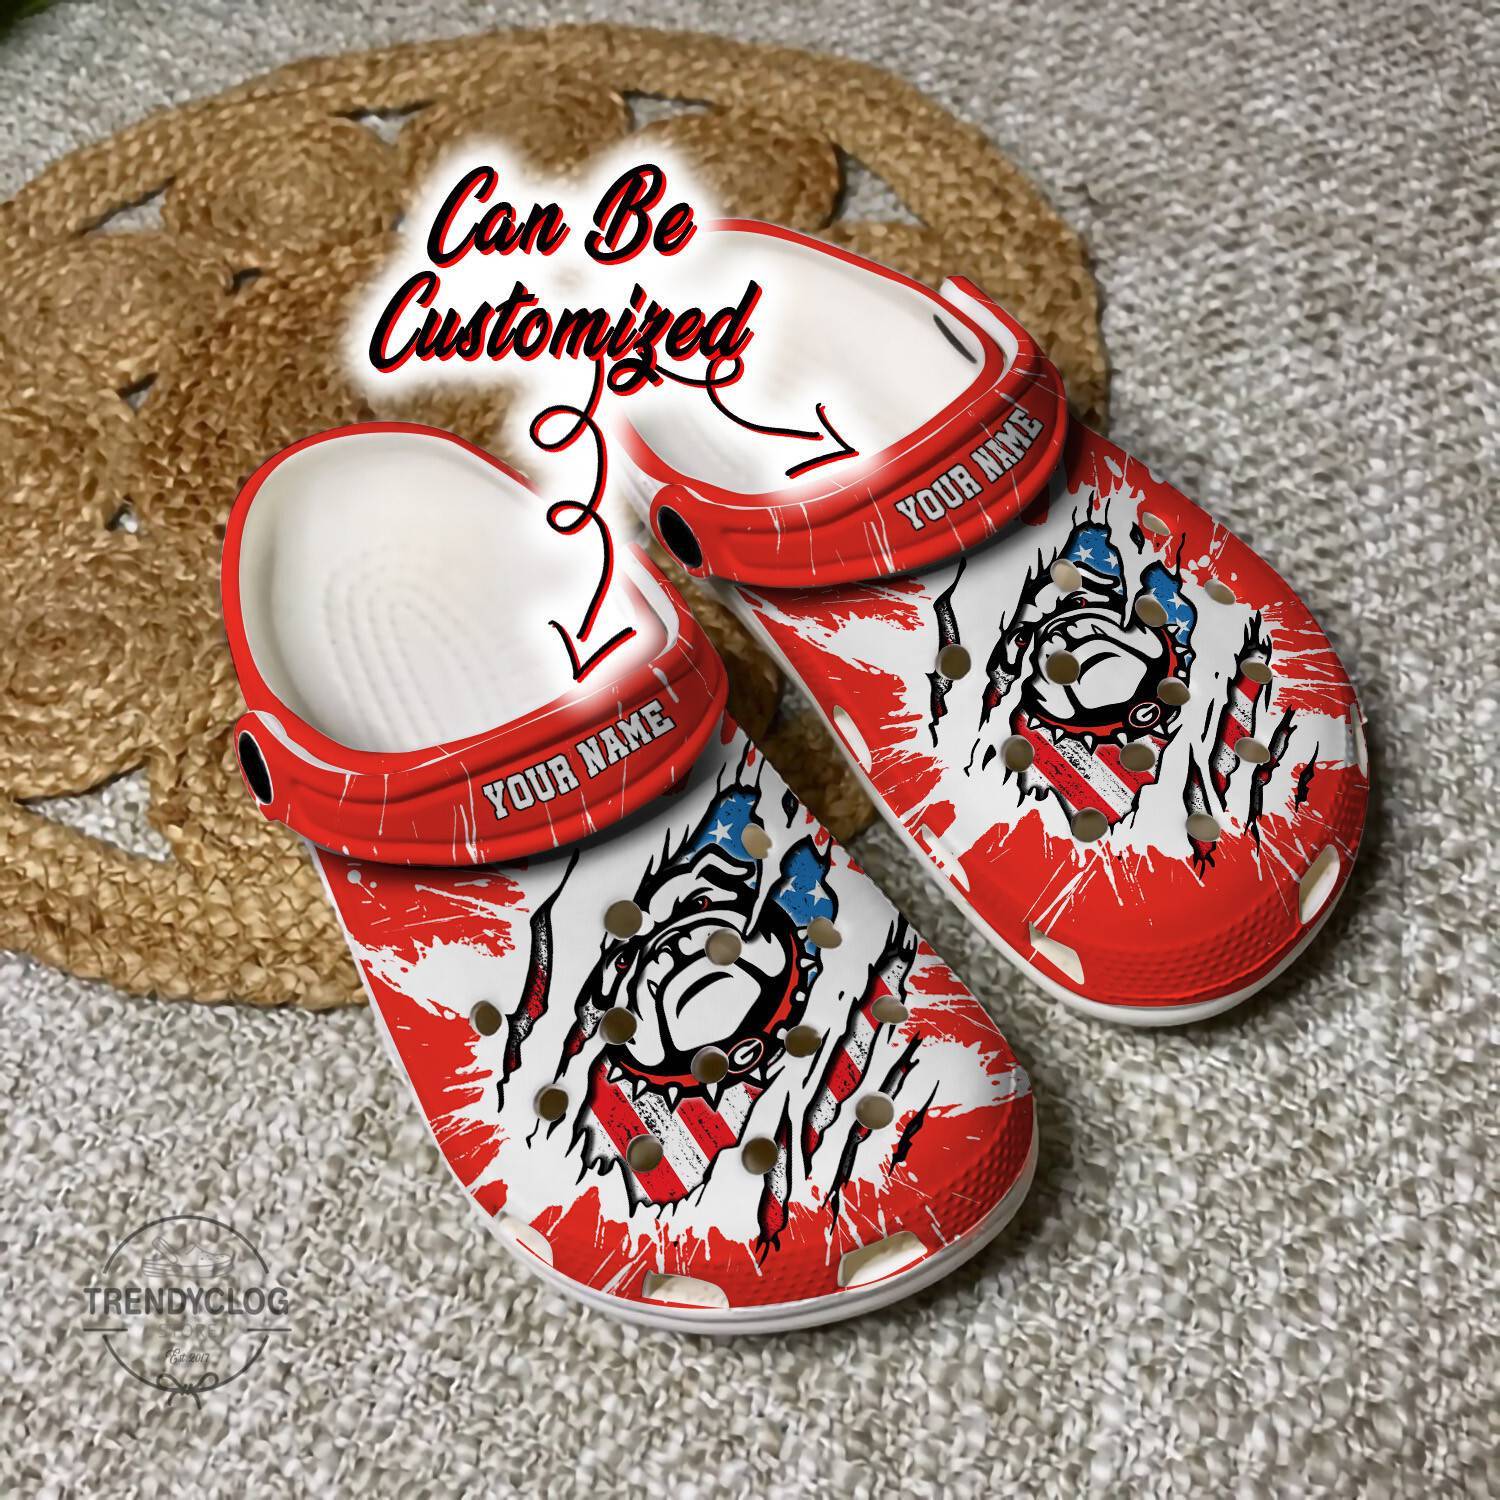 Sport Crocss Personalized GBulldogs University Ripped American Flag Clog Shoes